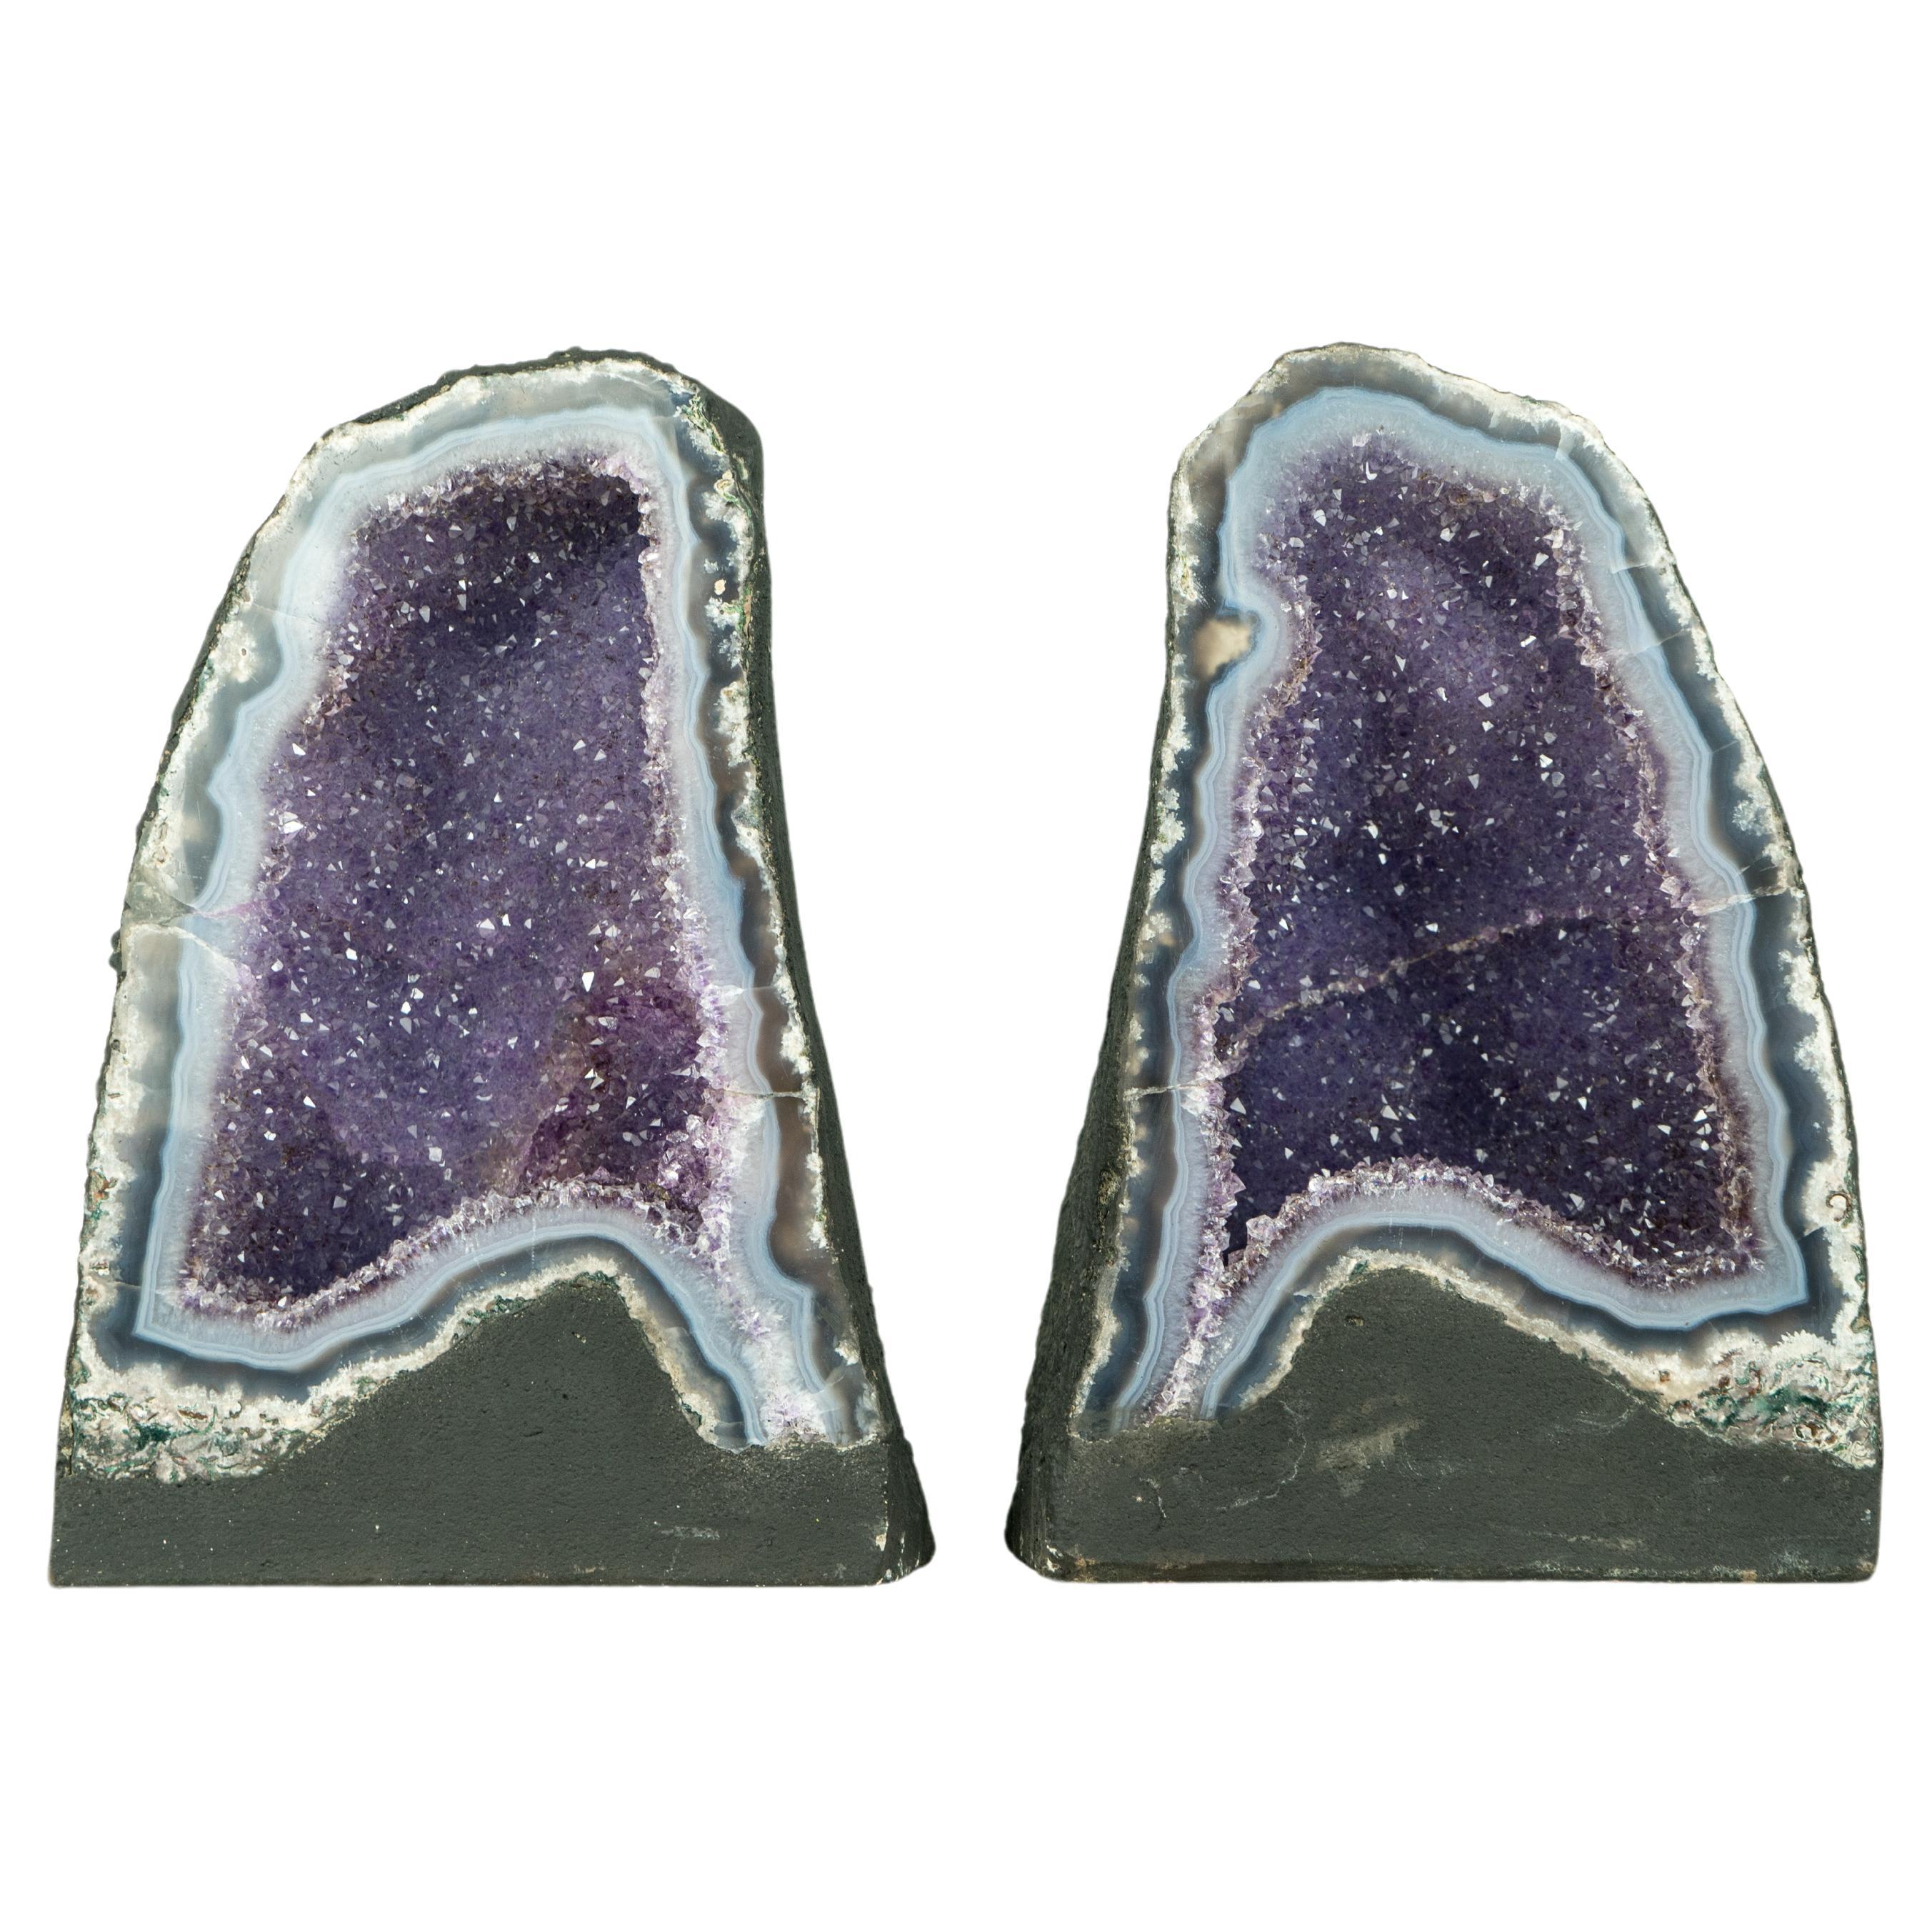 Pair of High-Grade Small Blue Lace Agate Geodes with Sparkly Lavender Amethyst